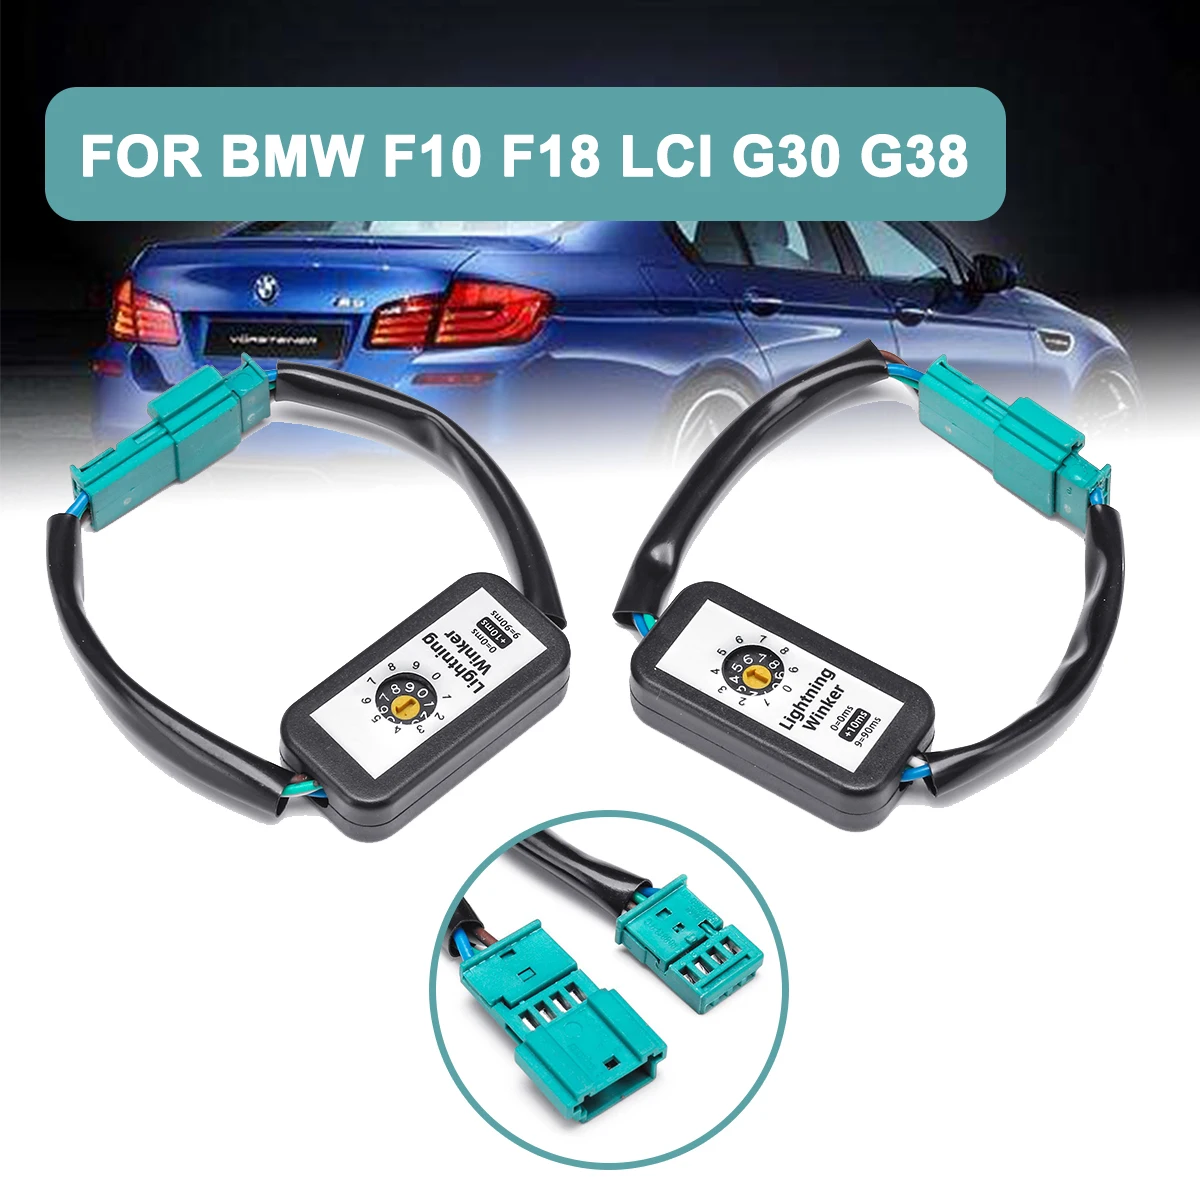 

For BMW F18 LCI G30 G38 2pcs Dynamic Left&Right Turn Signal Indicator LED Taillight Add-on Module Cable Wire Harness Adapter